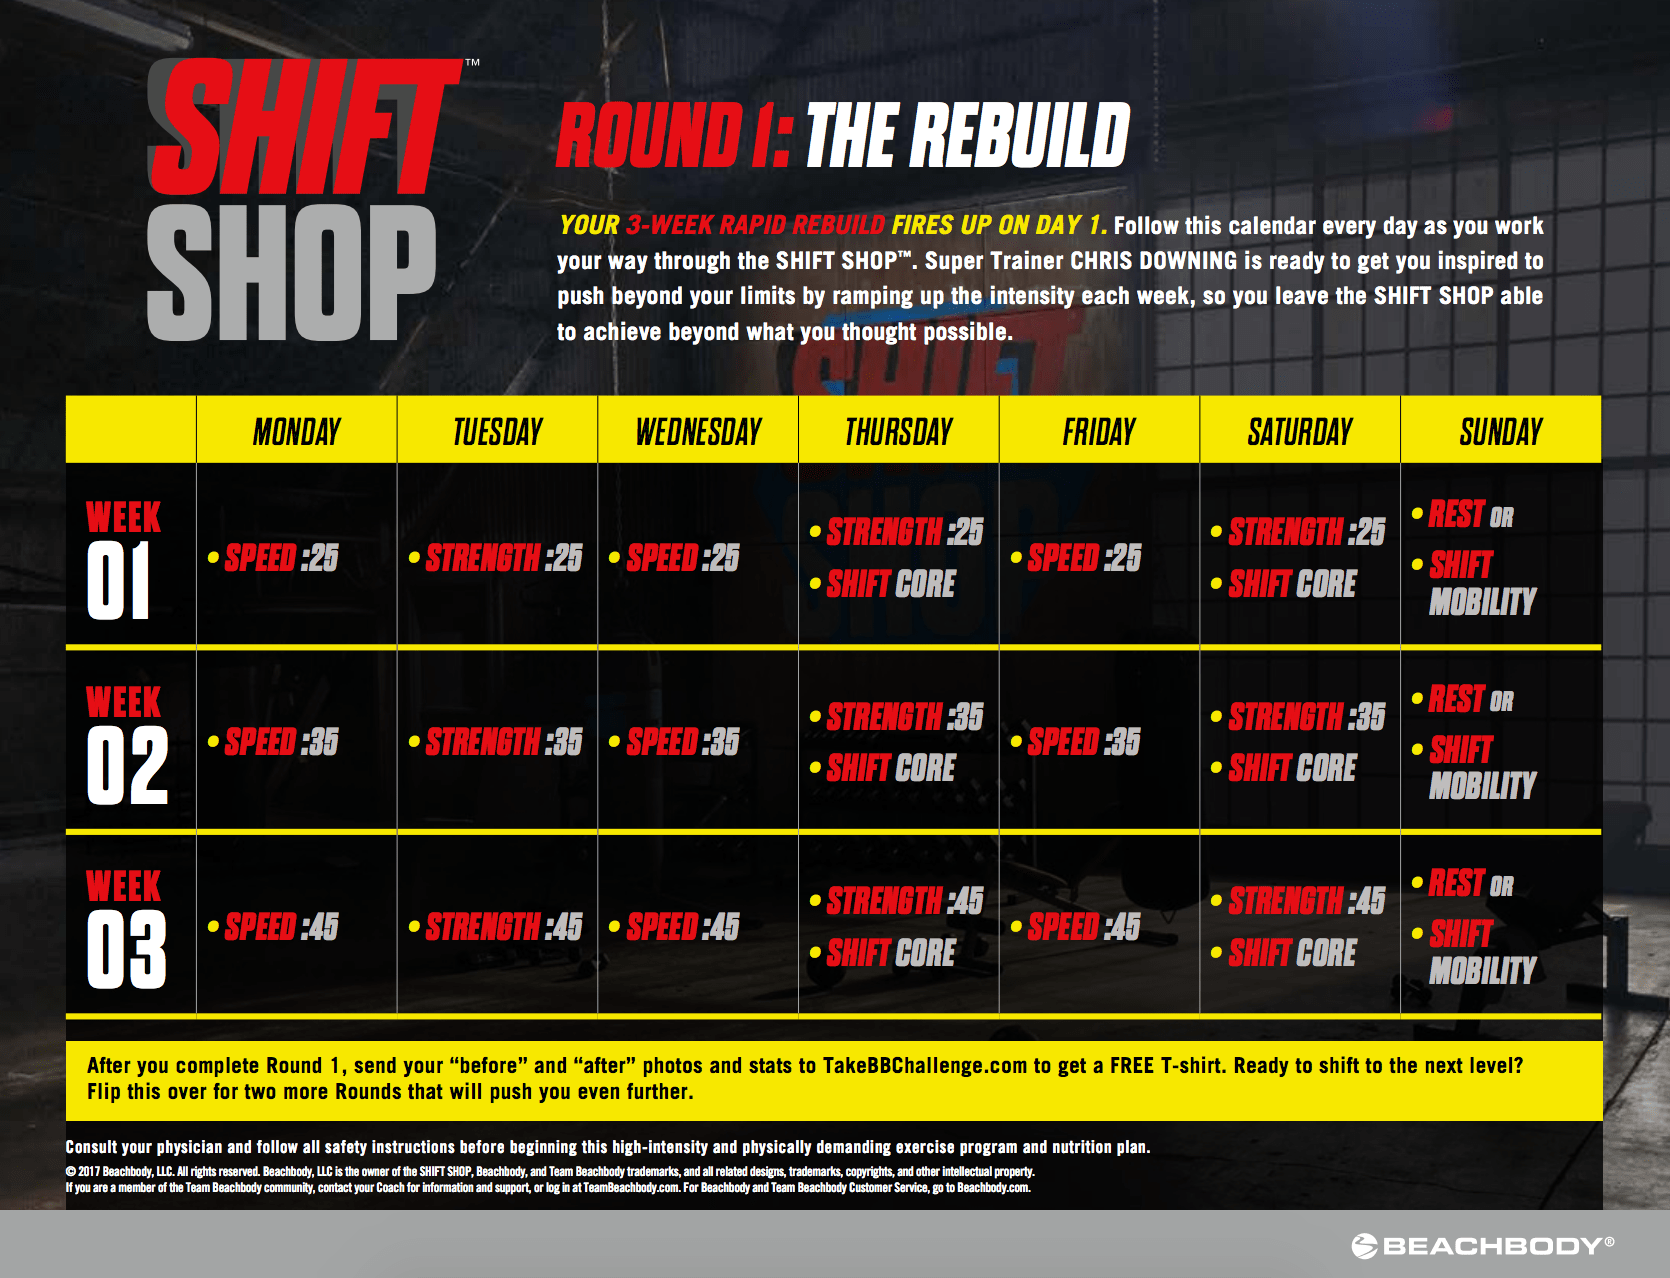 6 Day Shift shop workout review for push your ABS